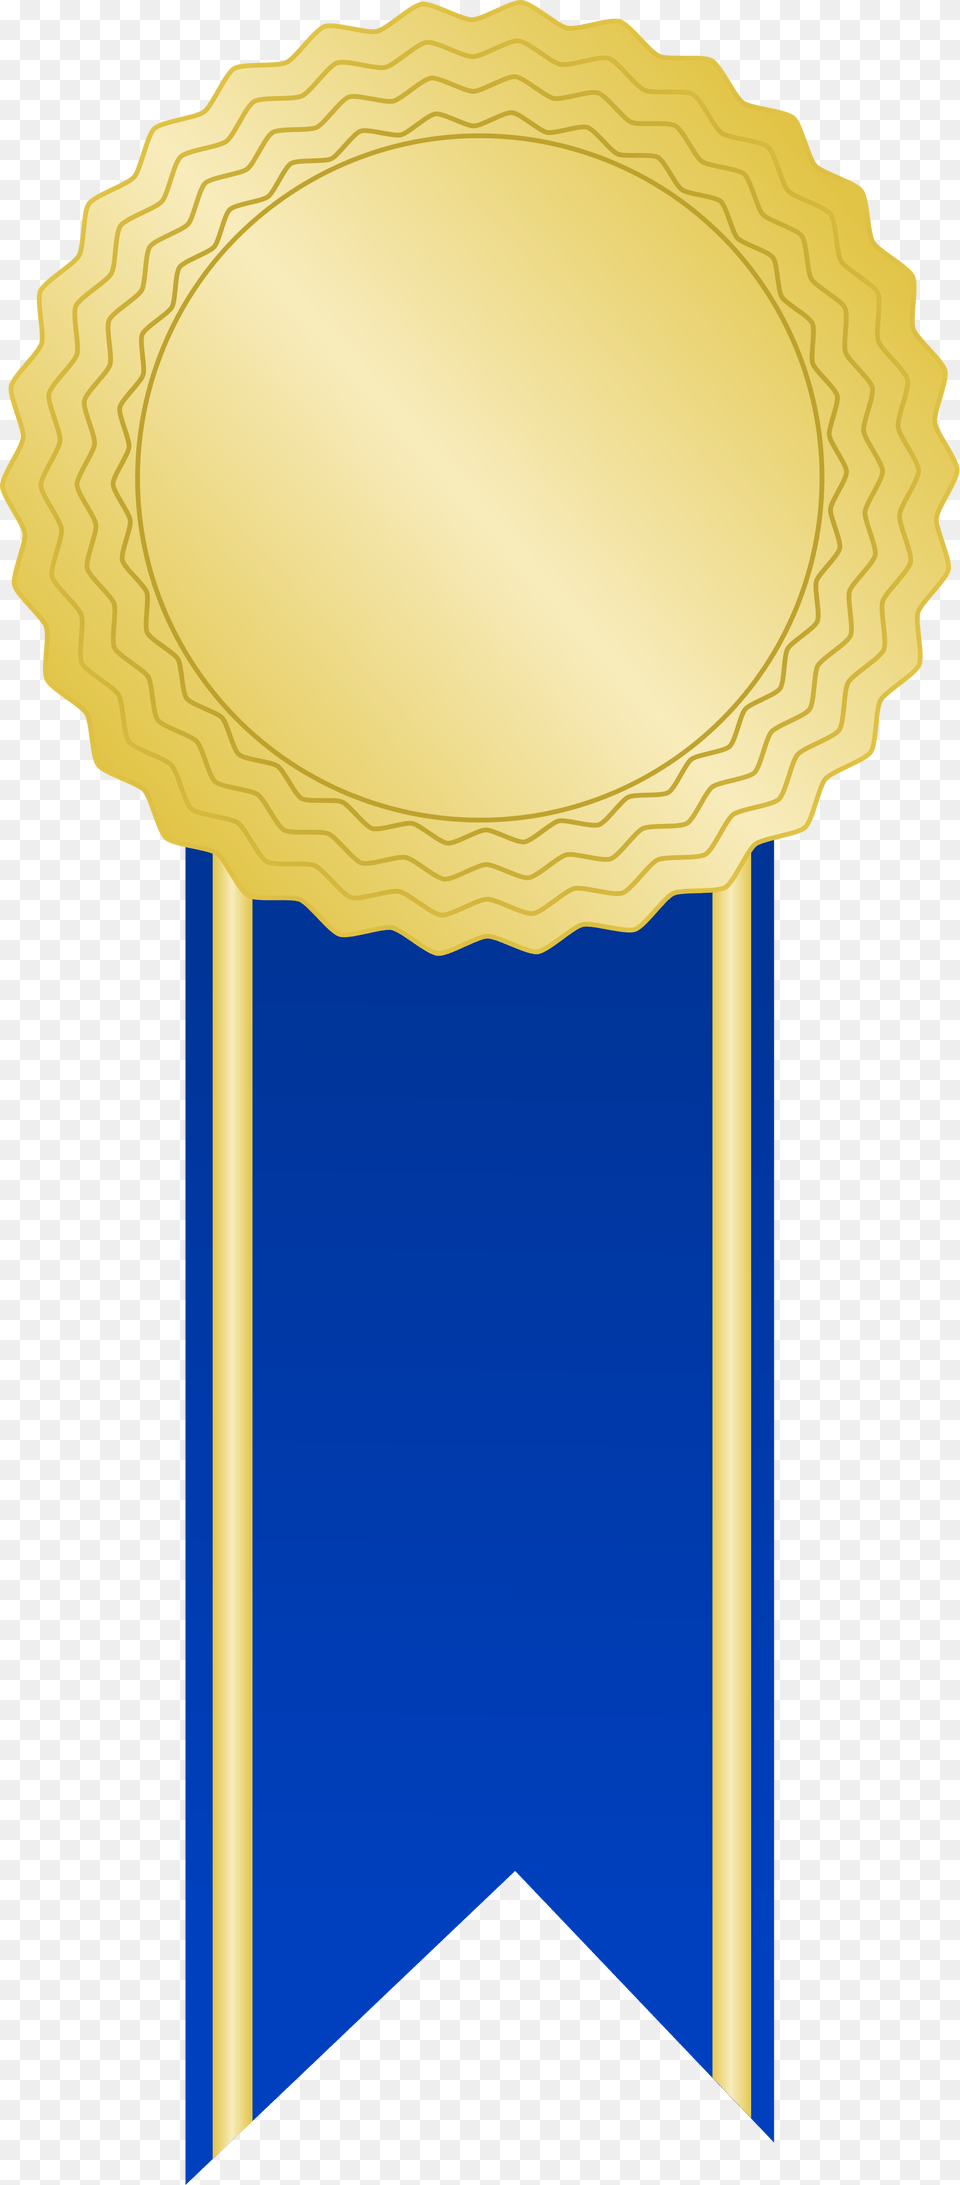 Golden Award With A Blue Ribbon, Gold, Trophy, Gold Medal, Plate Png Image